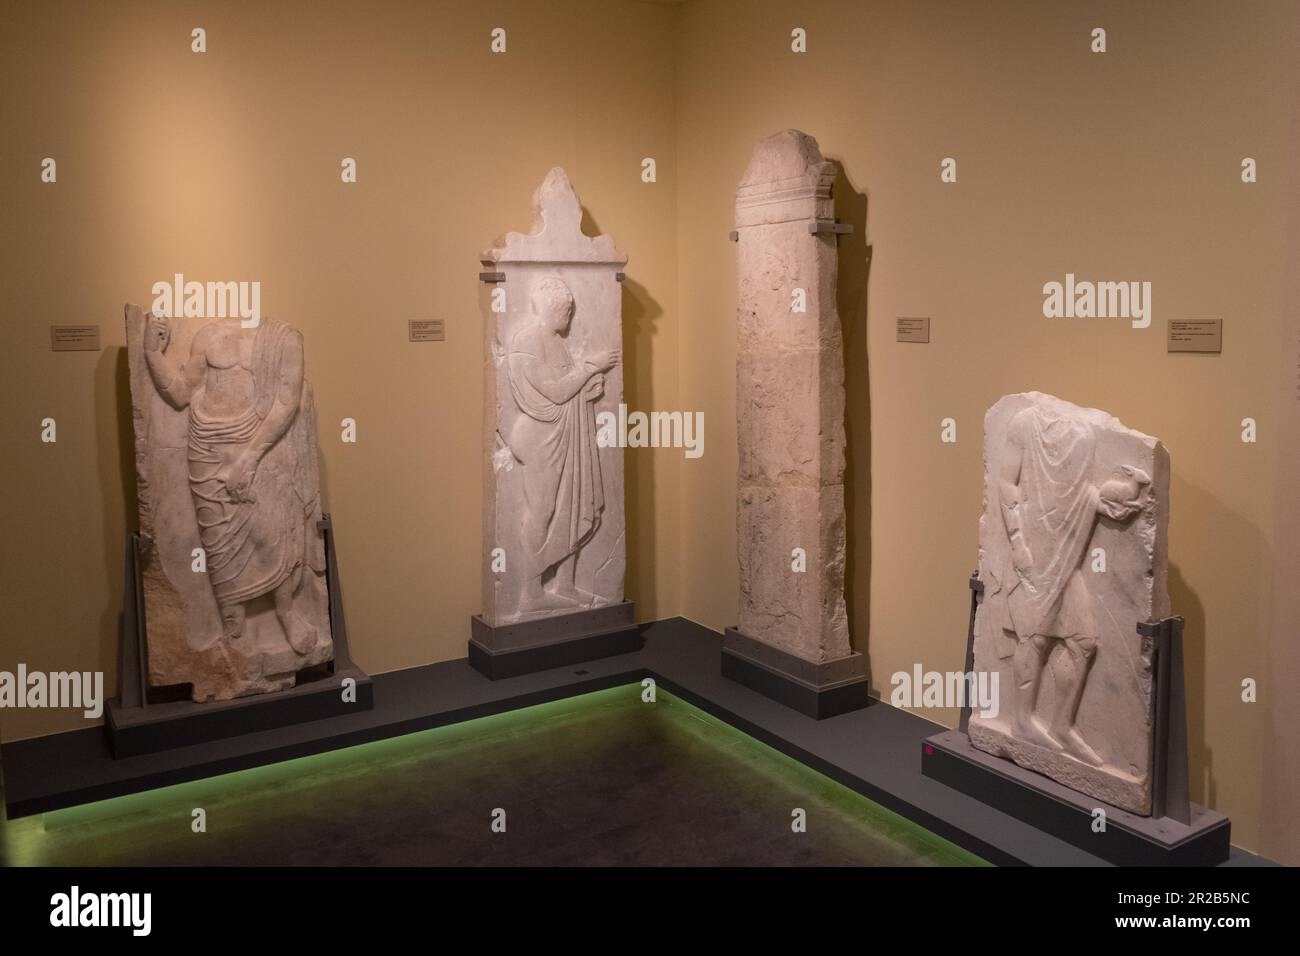 Grave steles from the classical antiquity period of ancient Greece . Diachronic Museum of Larissa , Greece Stock Photo